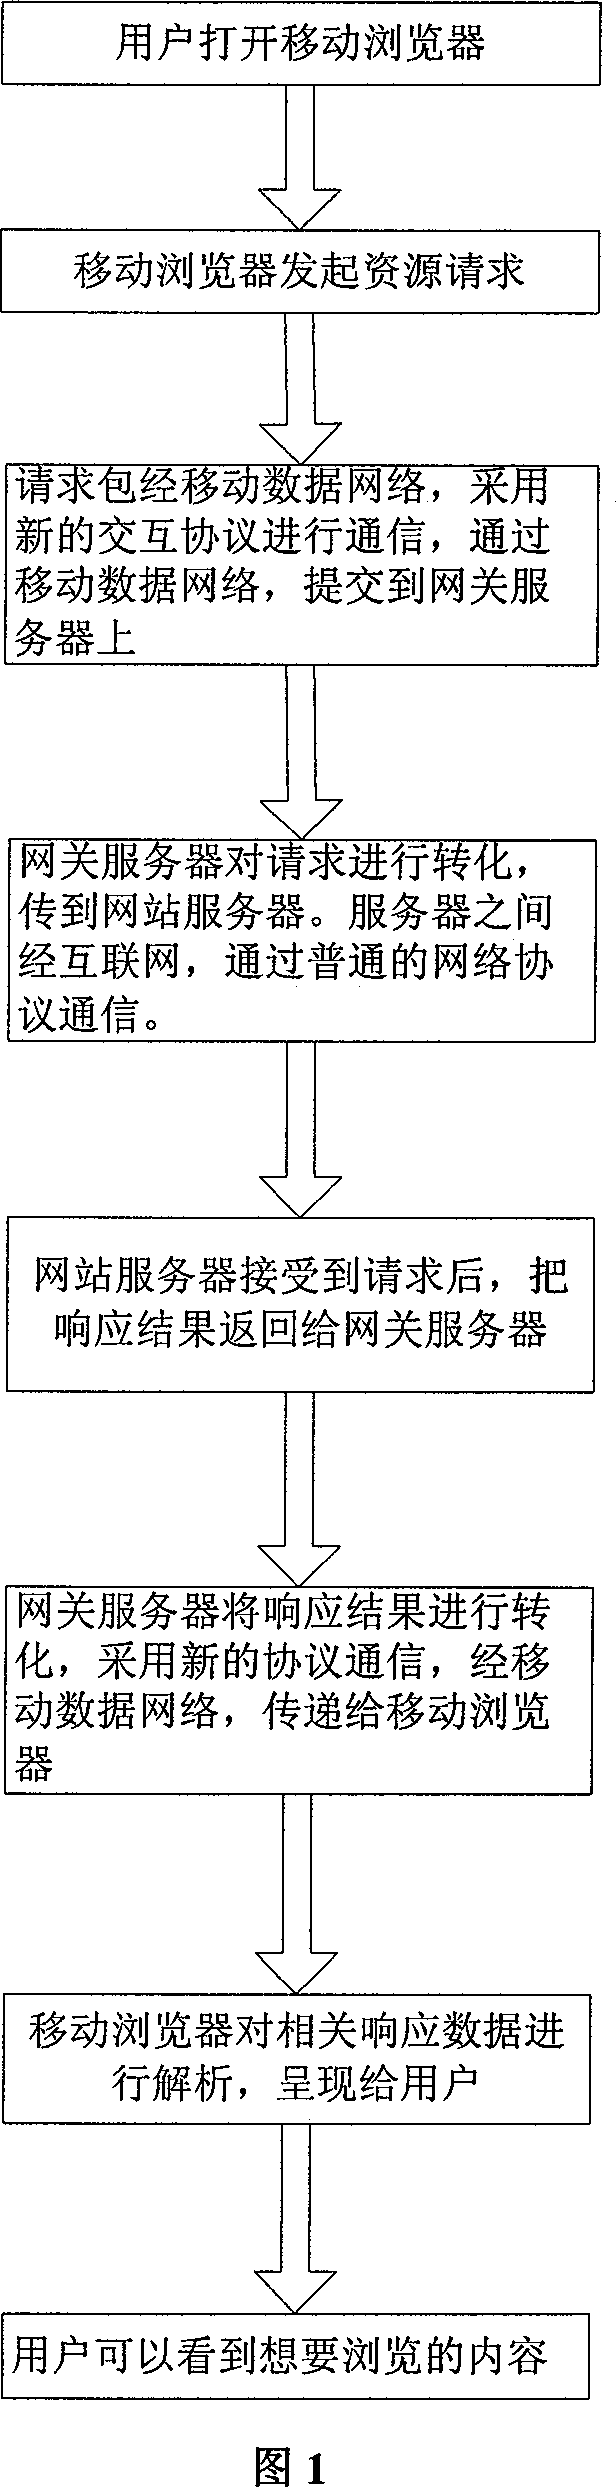 Method for implementing information issue and sharing of mobile browser